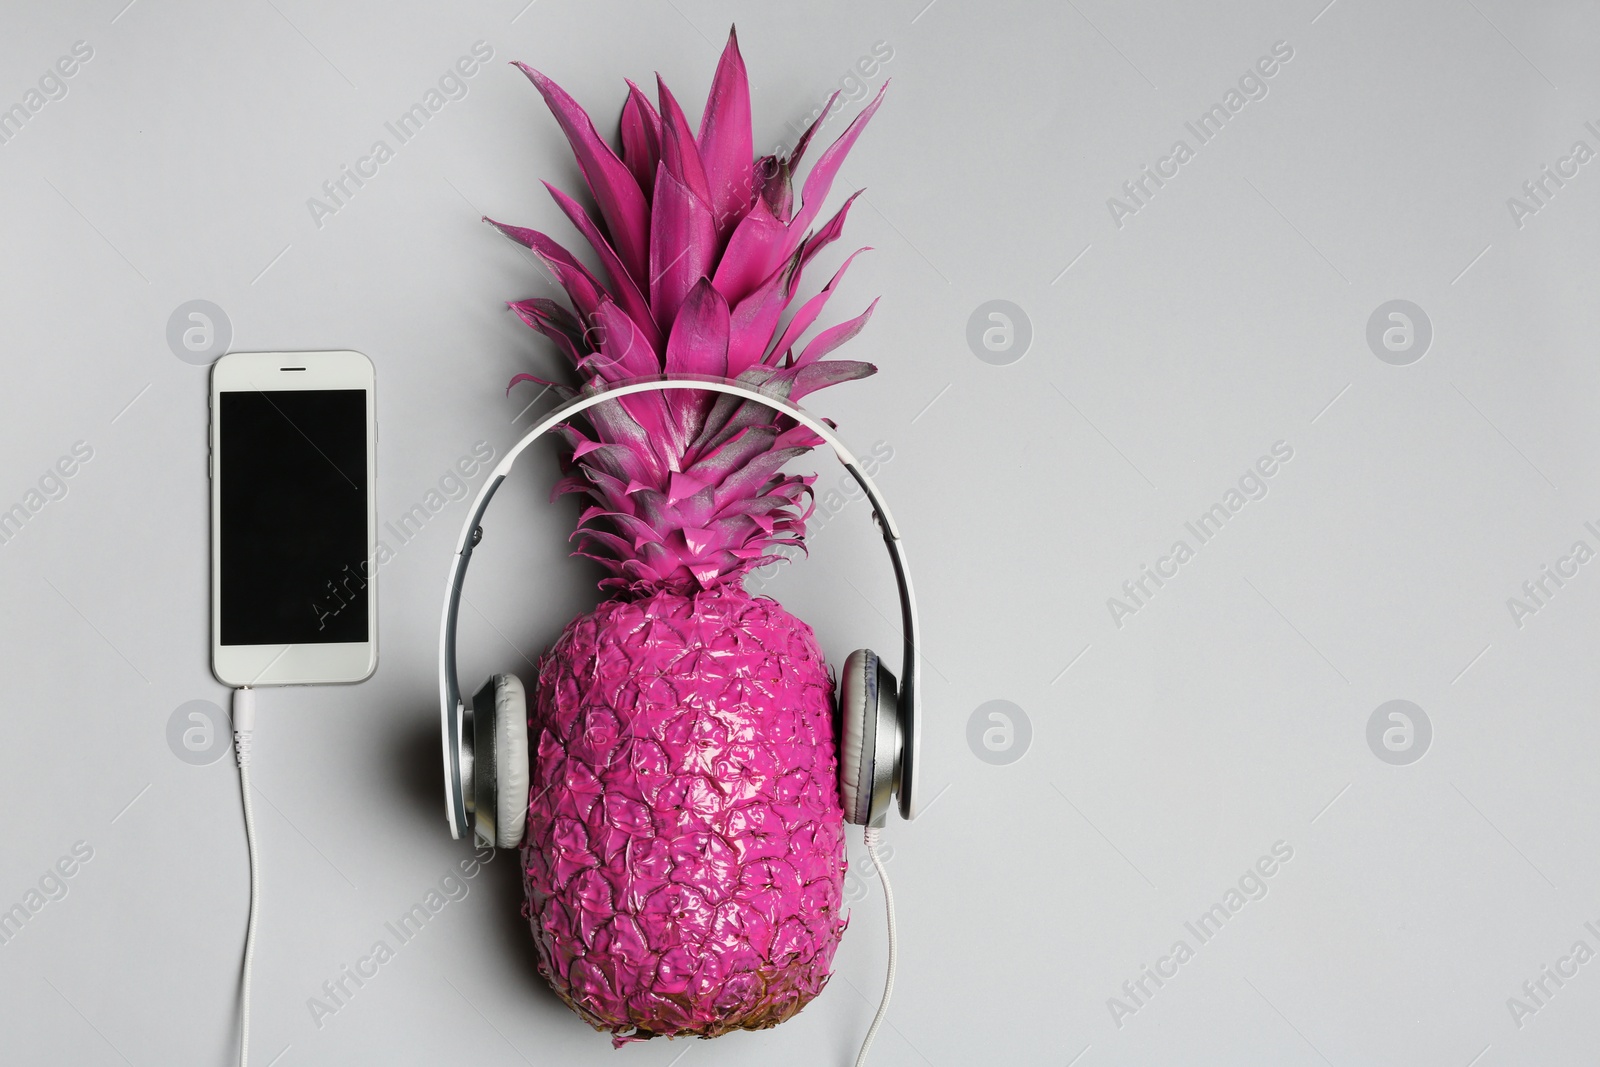 Photo of Pineapple with headphones and smartphone on grey background, top view with space for text